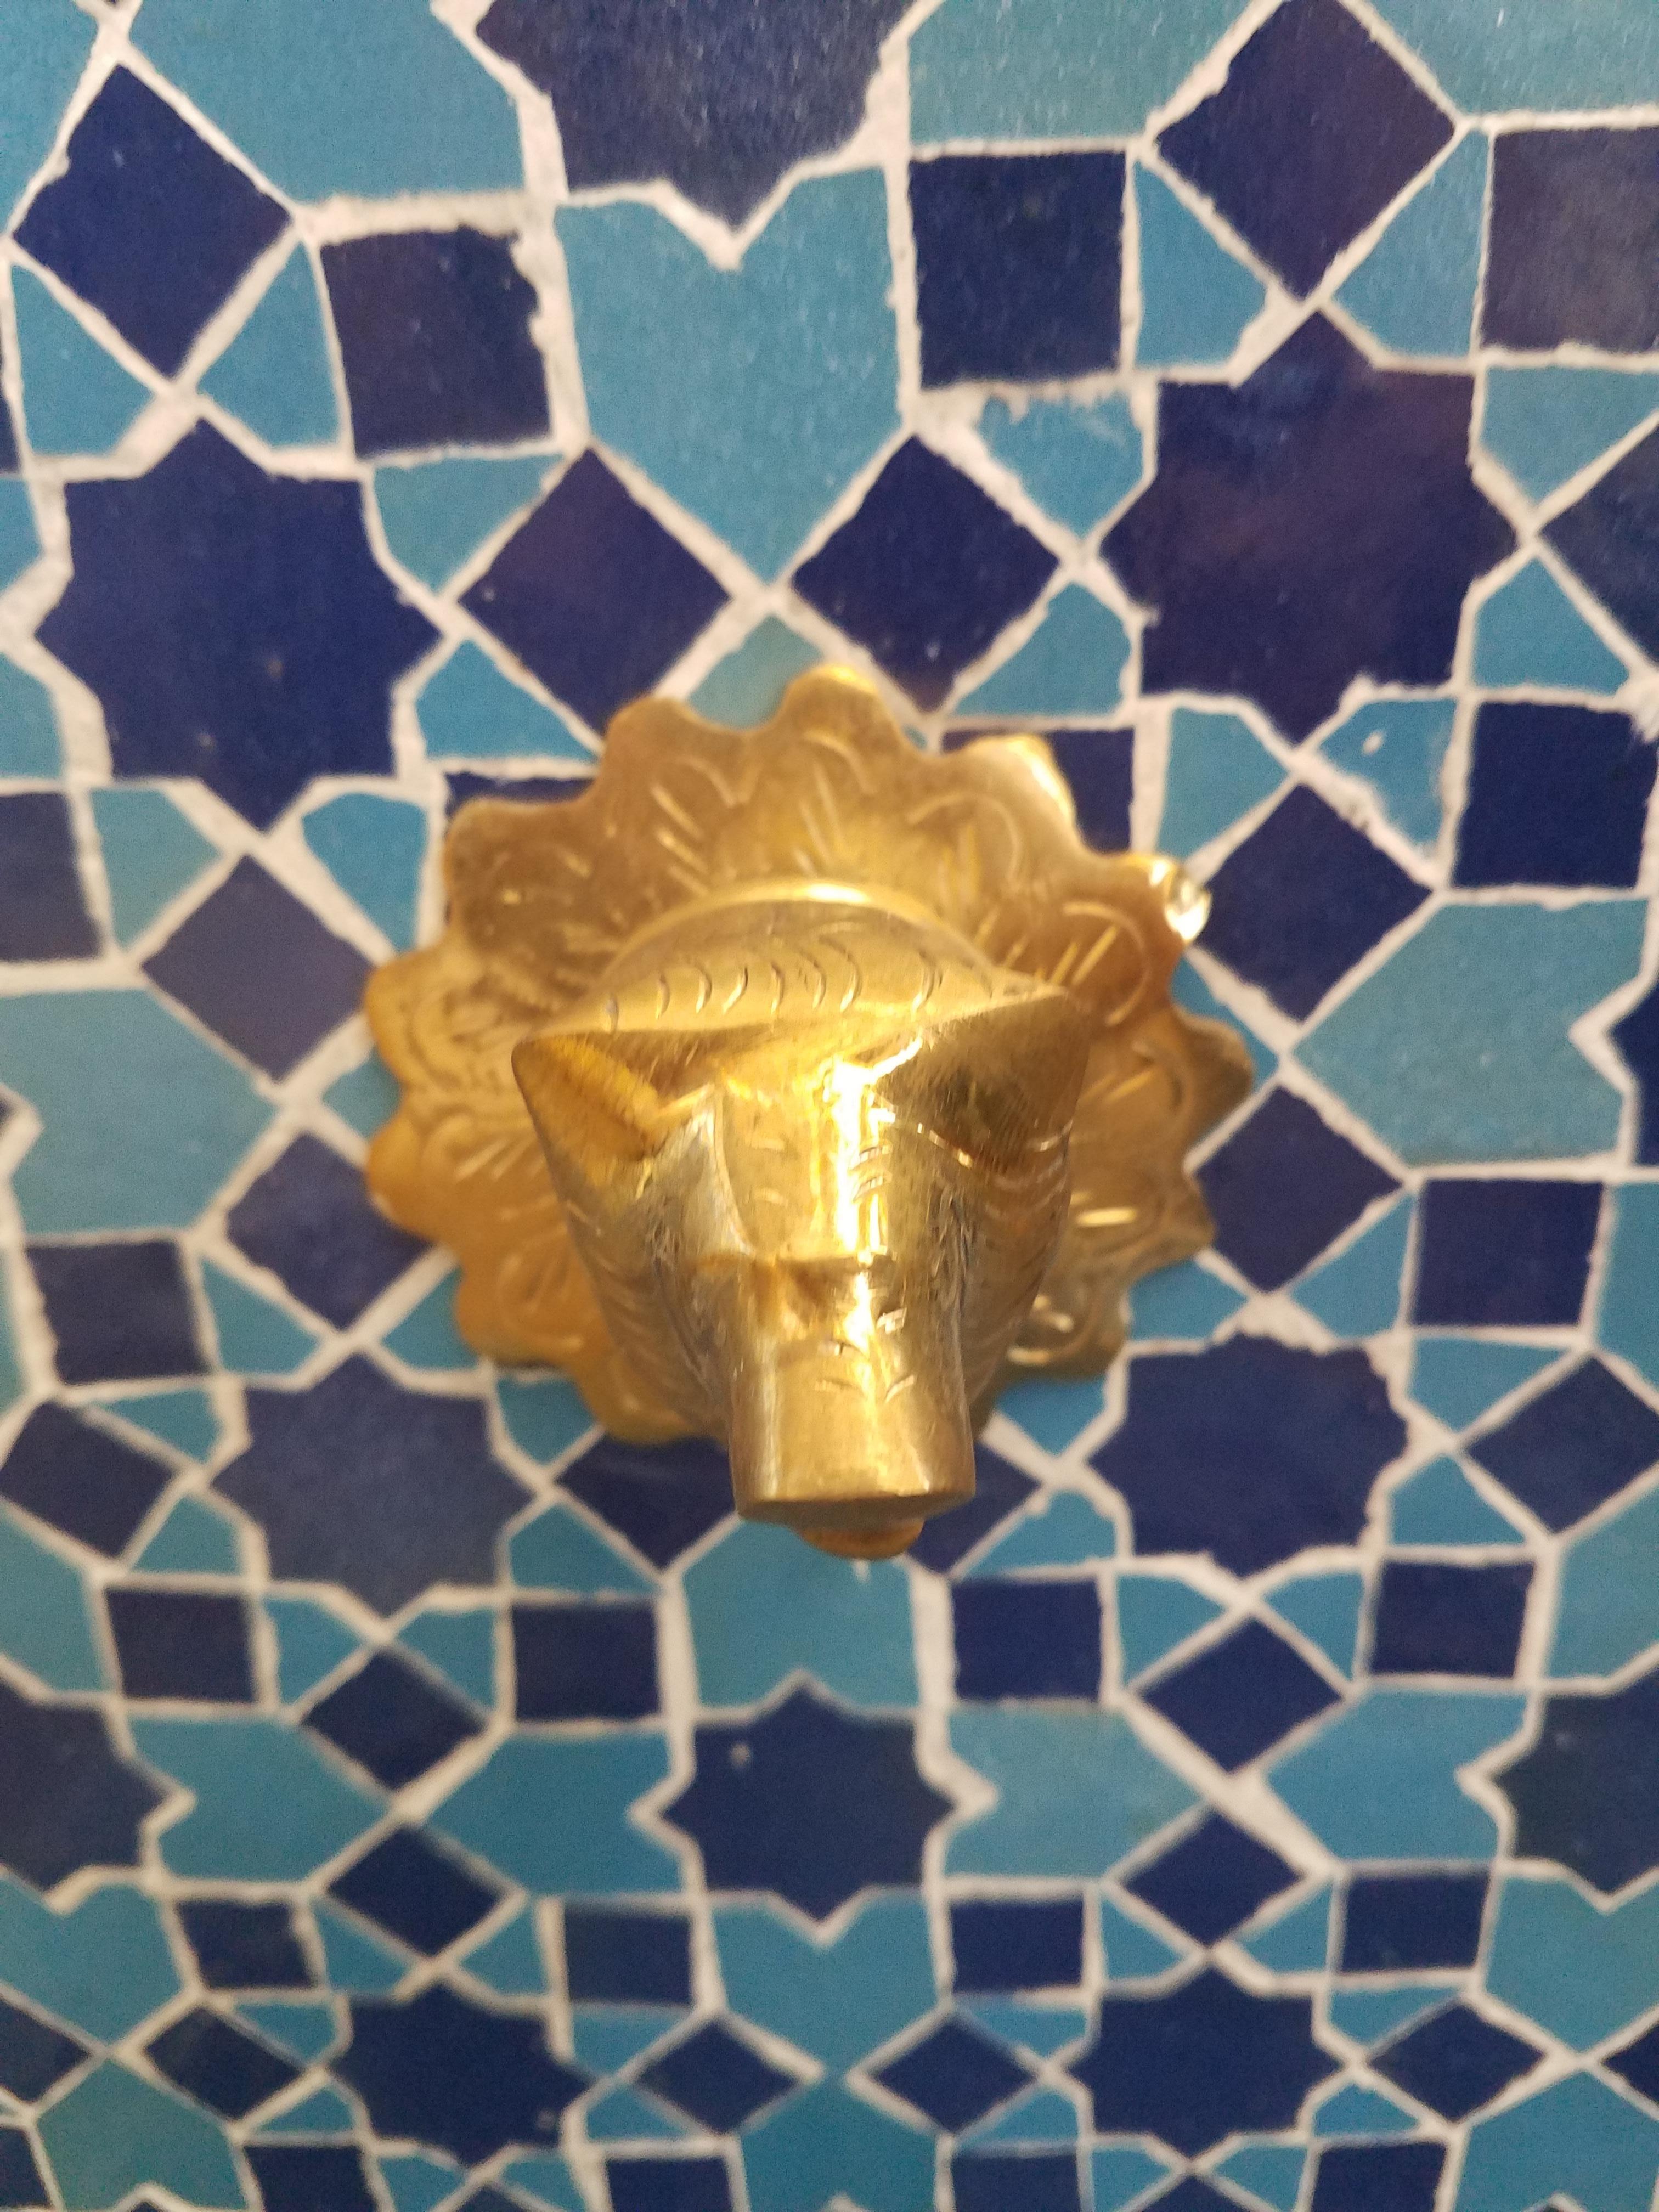 Just arrived !! Blue on Blue handmade Moroccan mosaic tile fountain made in Marrakech, Morocco. This amazing fountain measures approximately 41